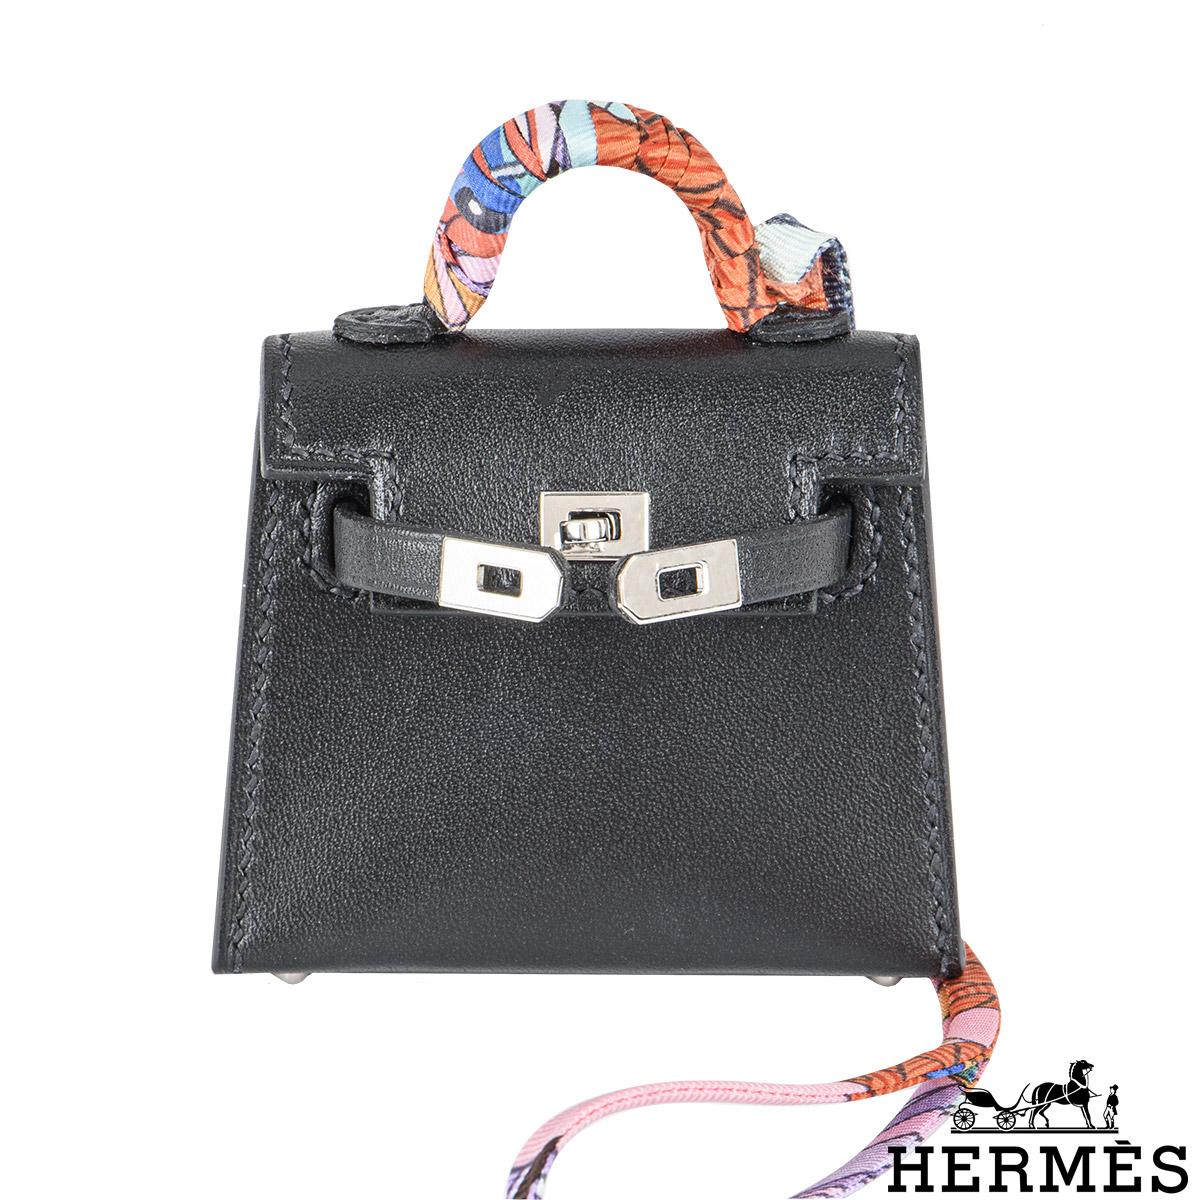 A chic Hermès Mini Kelly Twilly bag charm. The exterior of this Kelly bag charm features a Noir Tadelakt leather detailed with tonal stitching. It features palladium hardware with a front toggle closure, and a top handle wrapped with a multicoloured